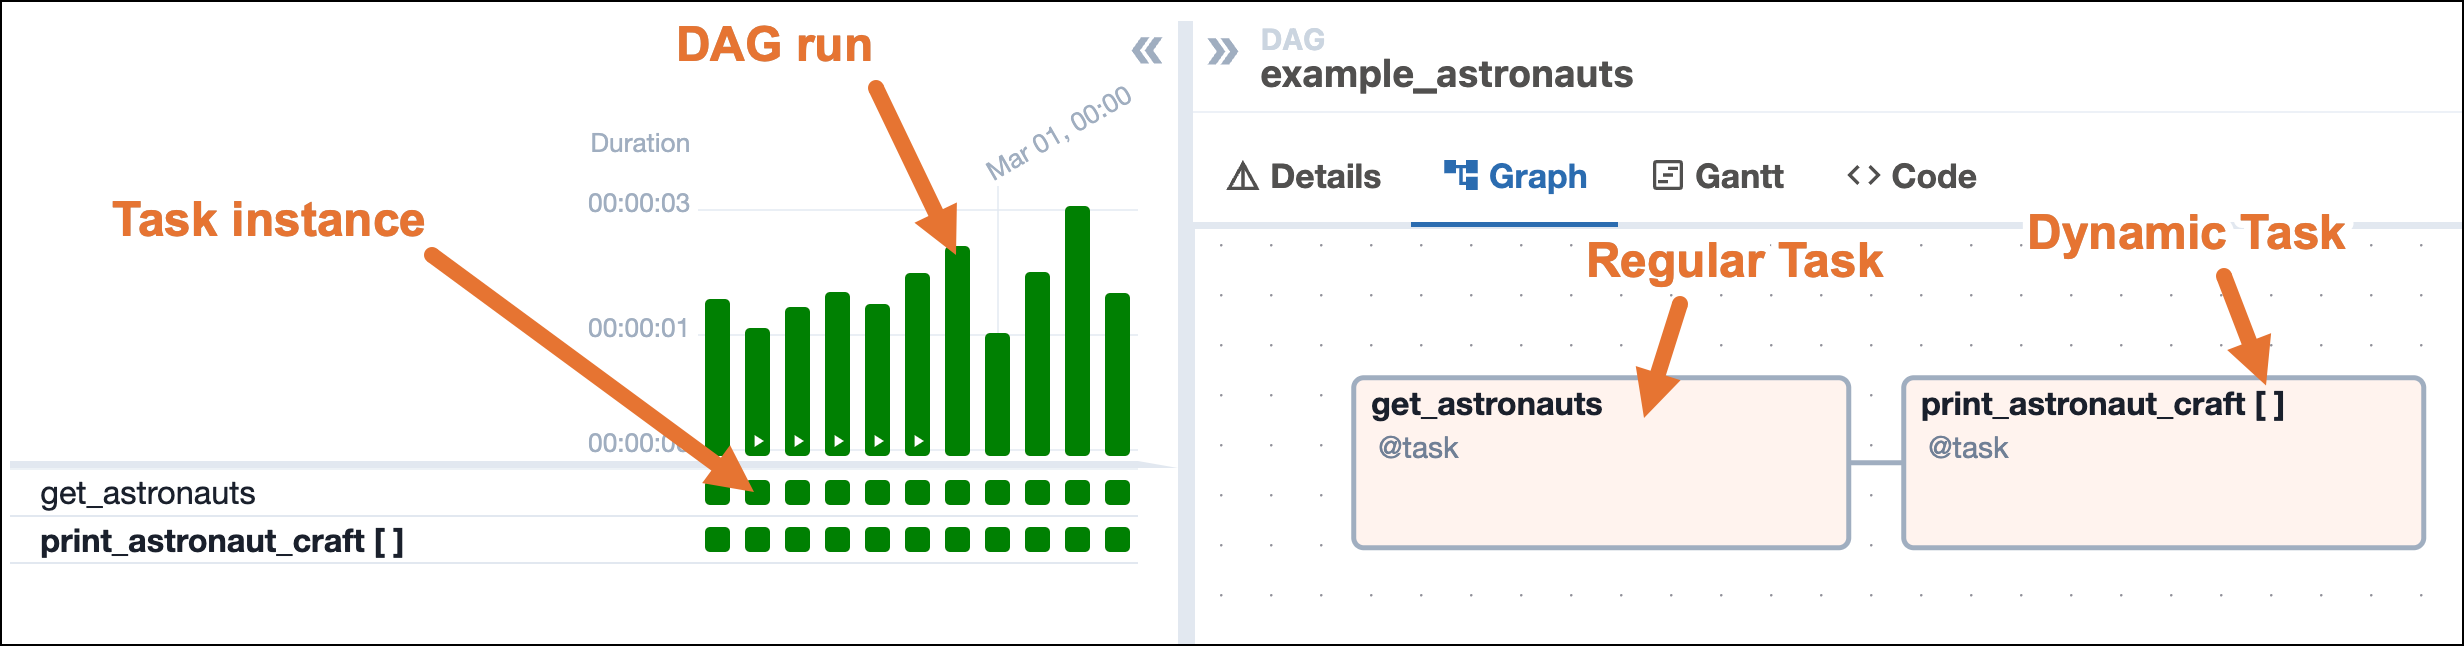 Screenshot of the Airflow UI Grid view with the Graph tab selected showing a DAG graph with a regular and a dynamic task as well as a DAG run and Task instance.